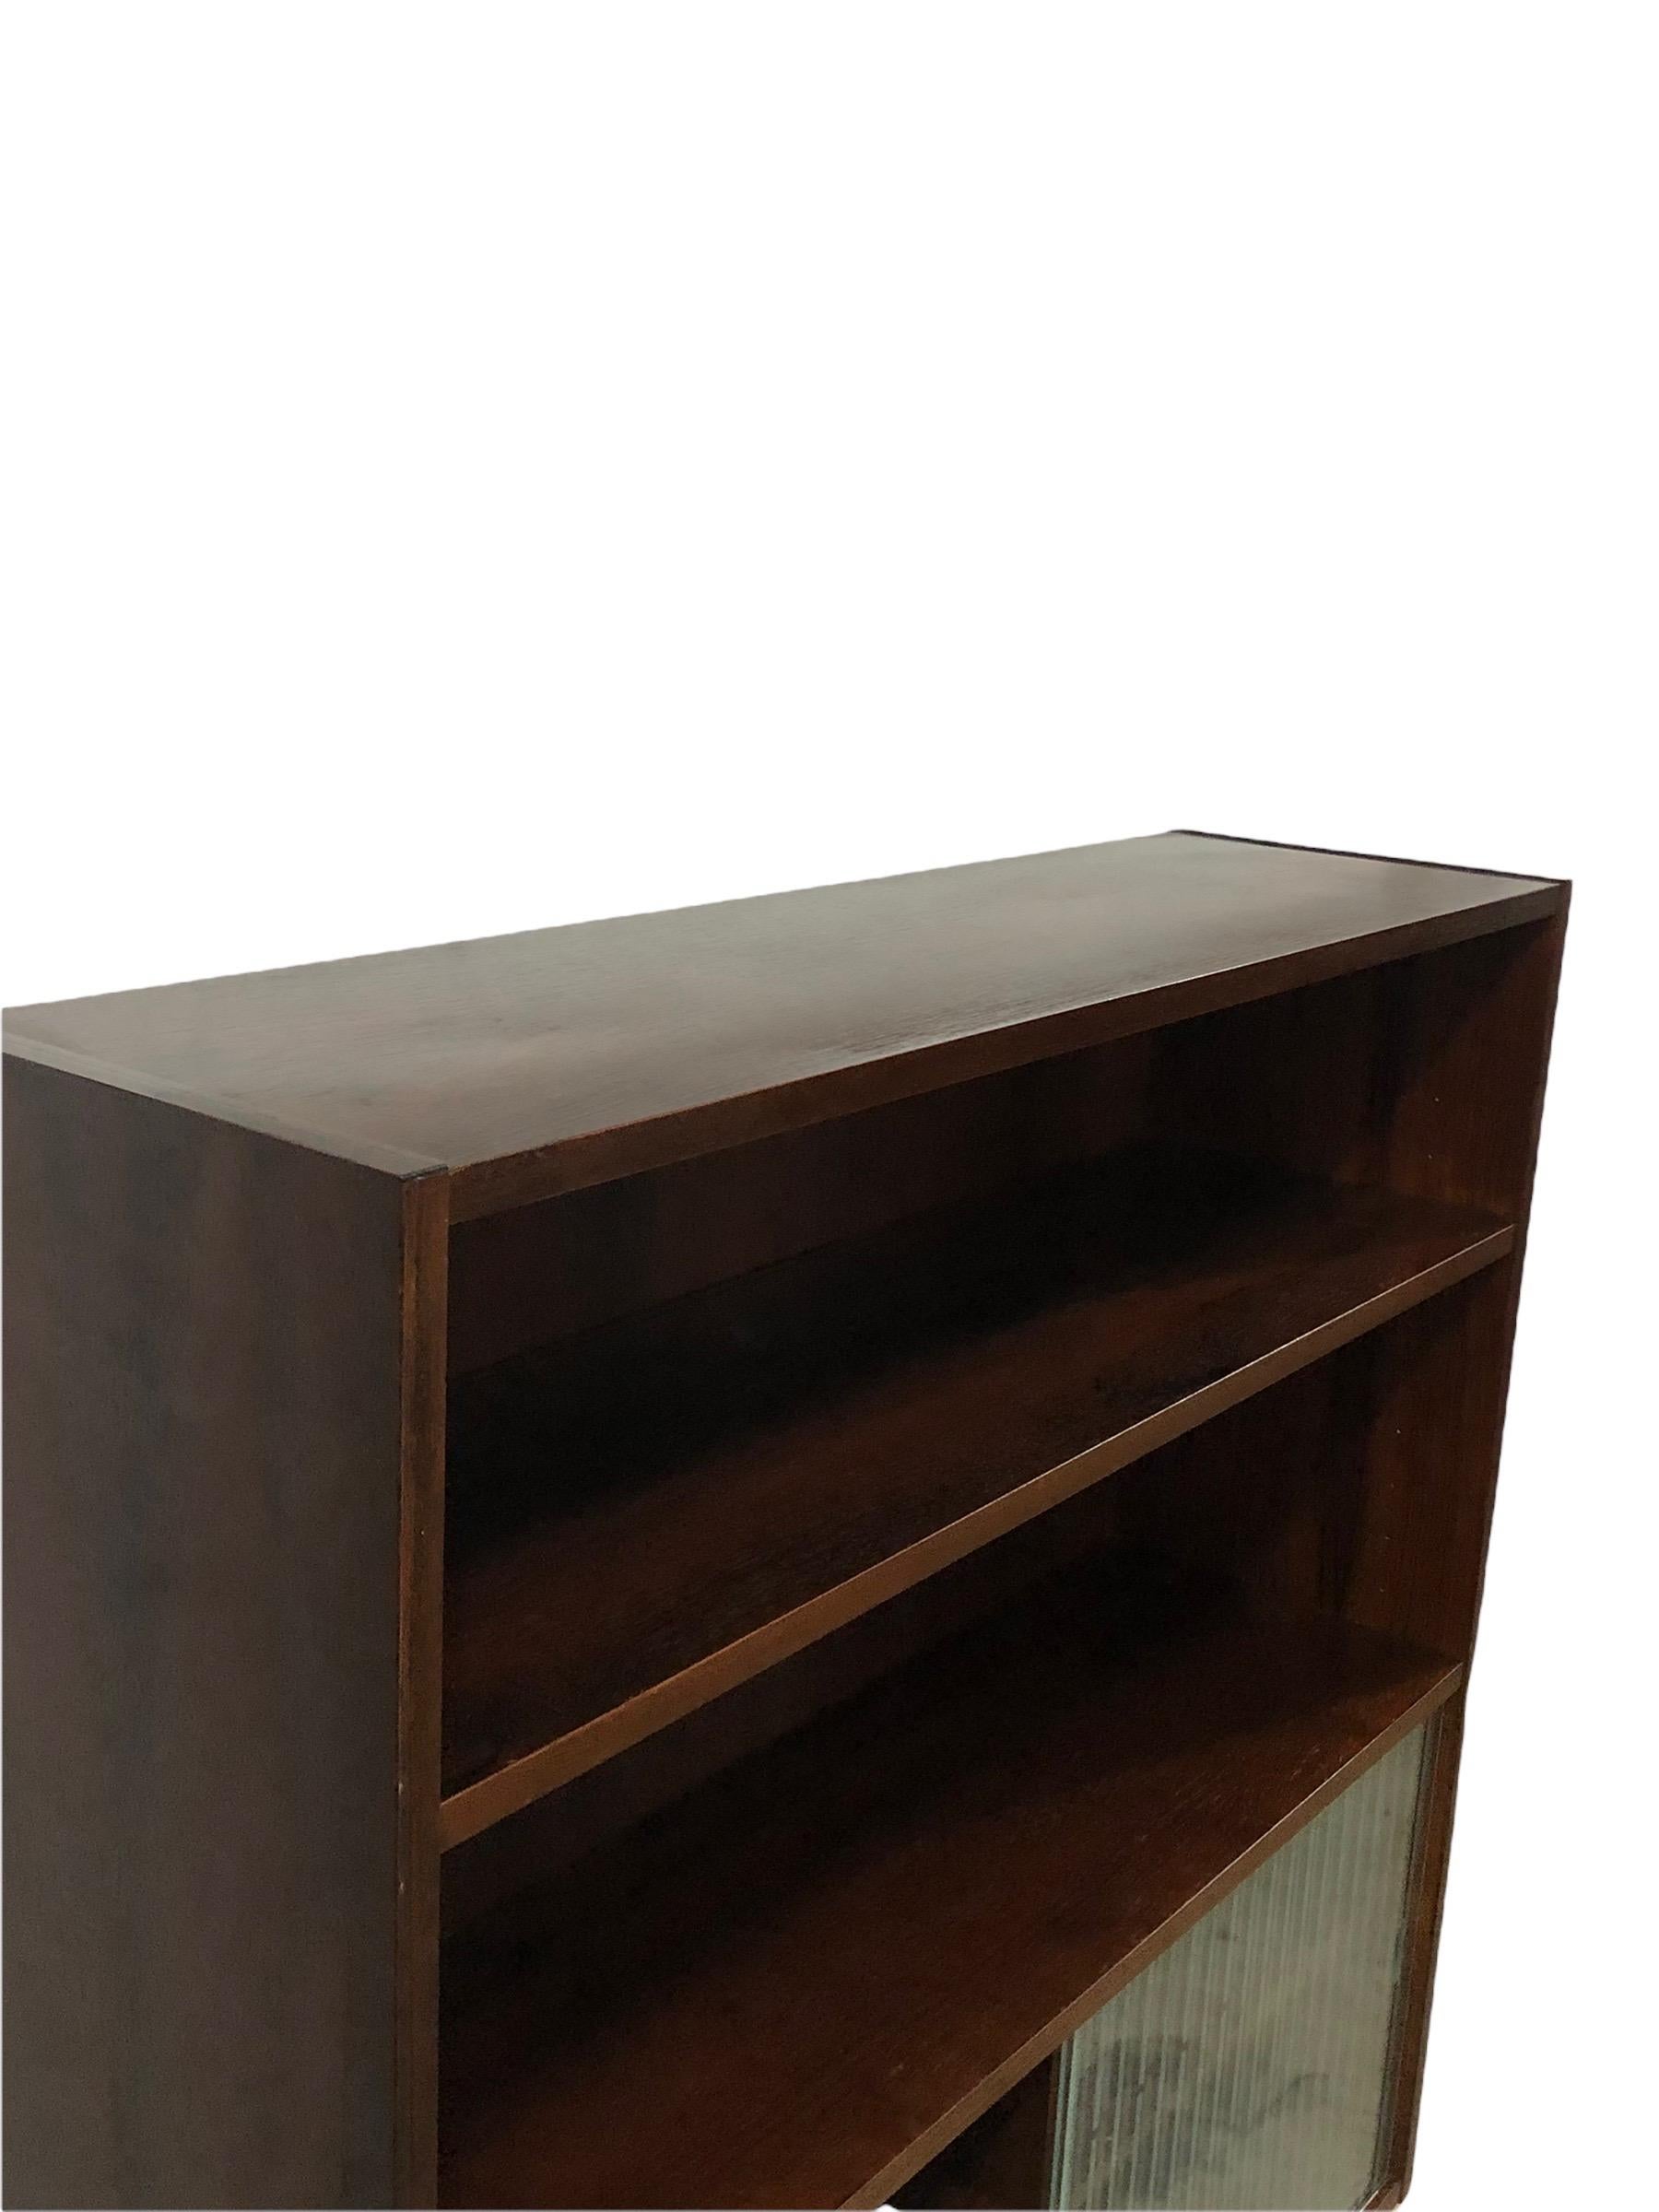 Mid-20th Century Vintage Danish Mid-Century Modern Rosewood Bookcase or Display Cabinet